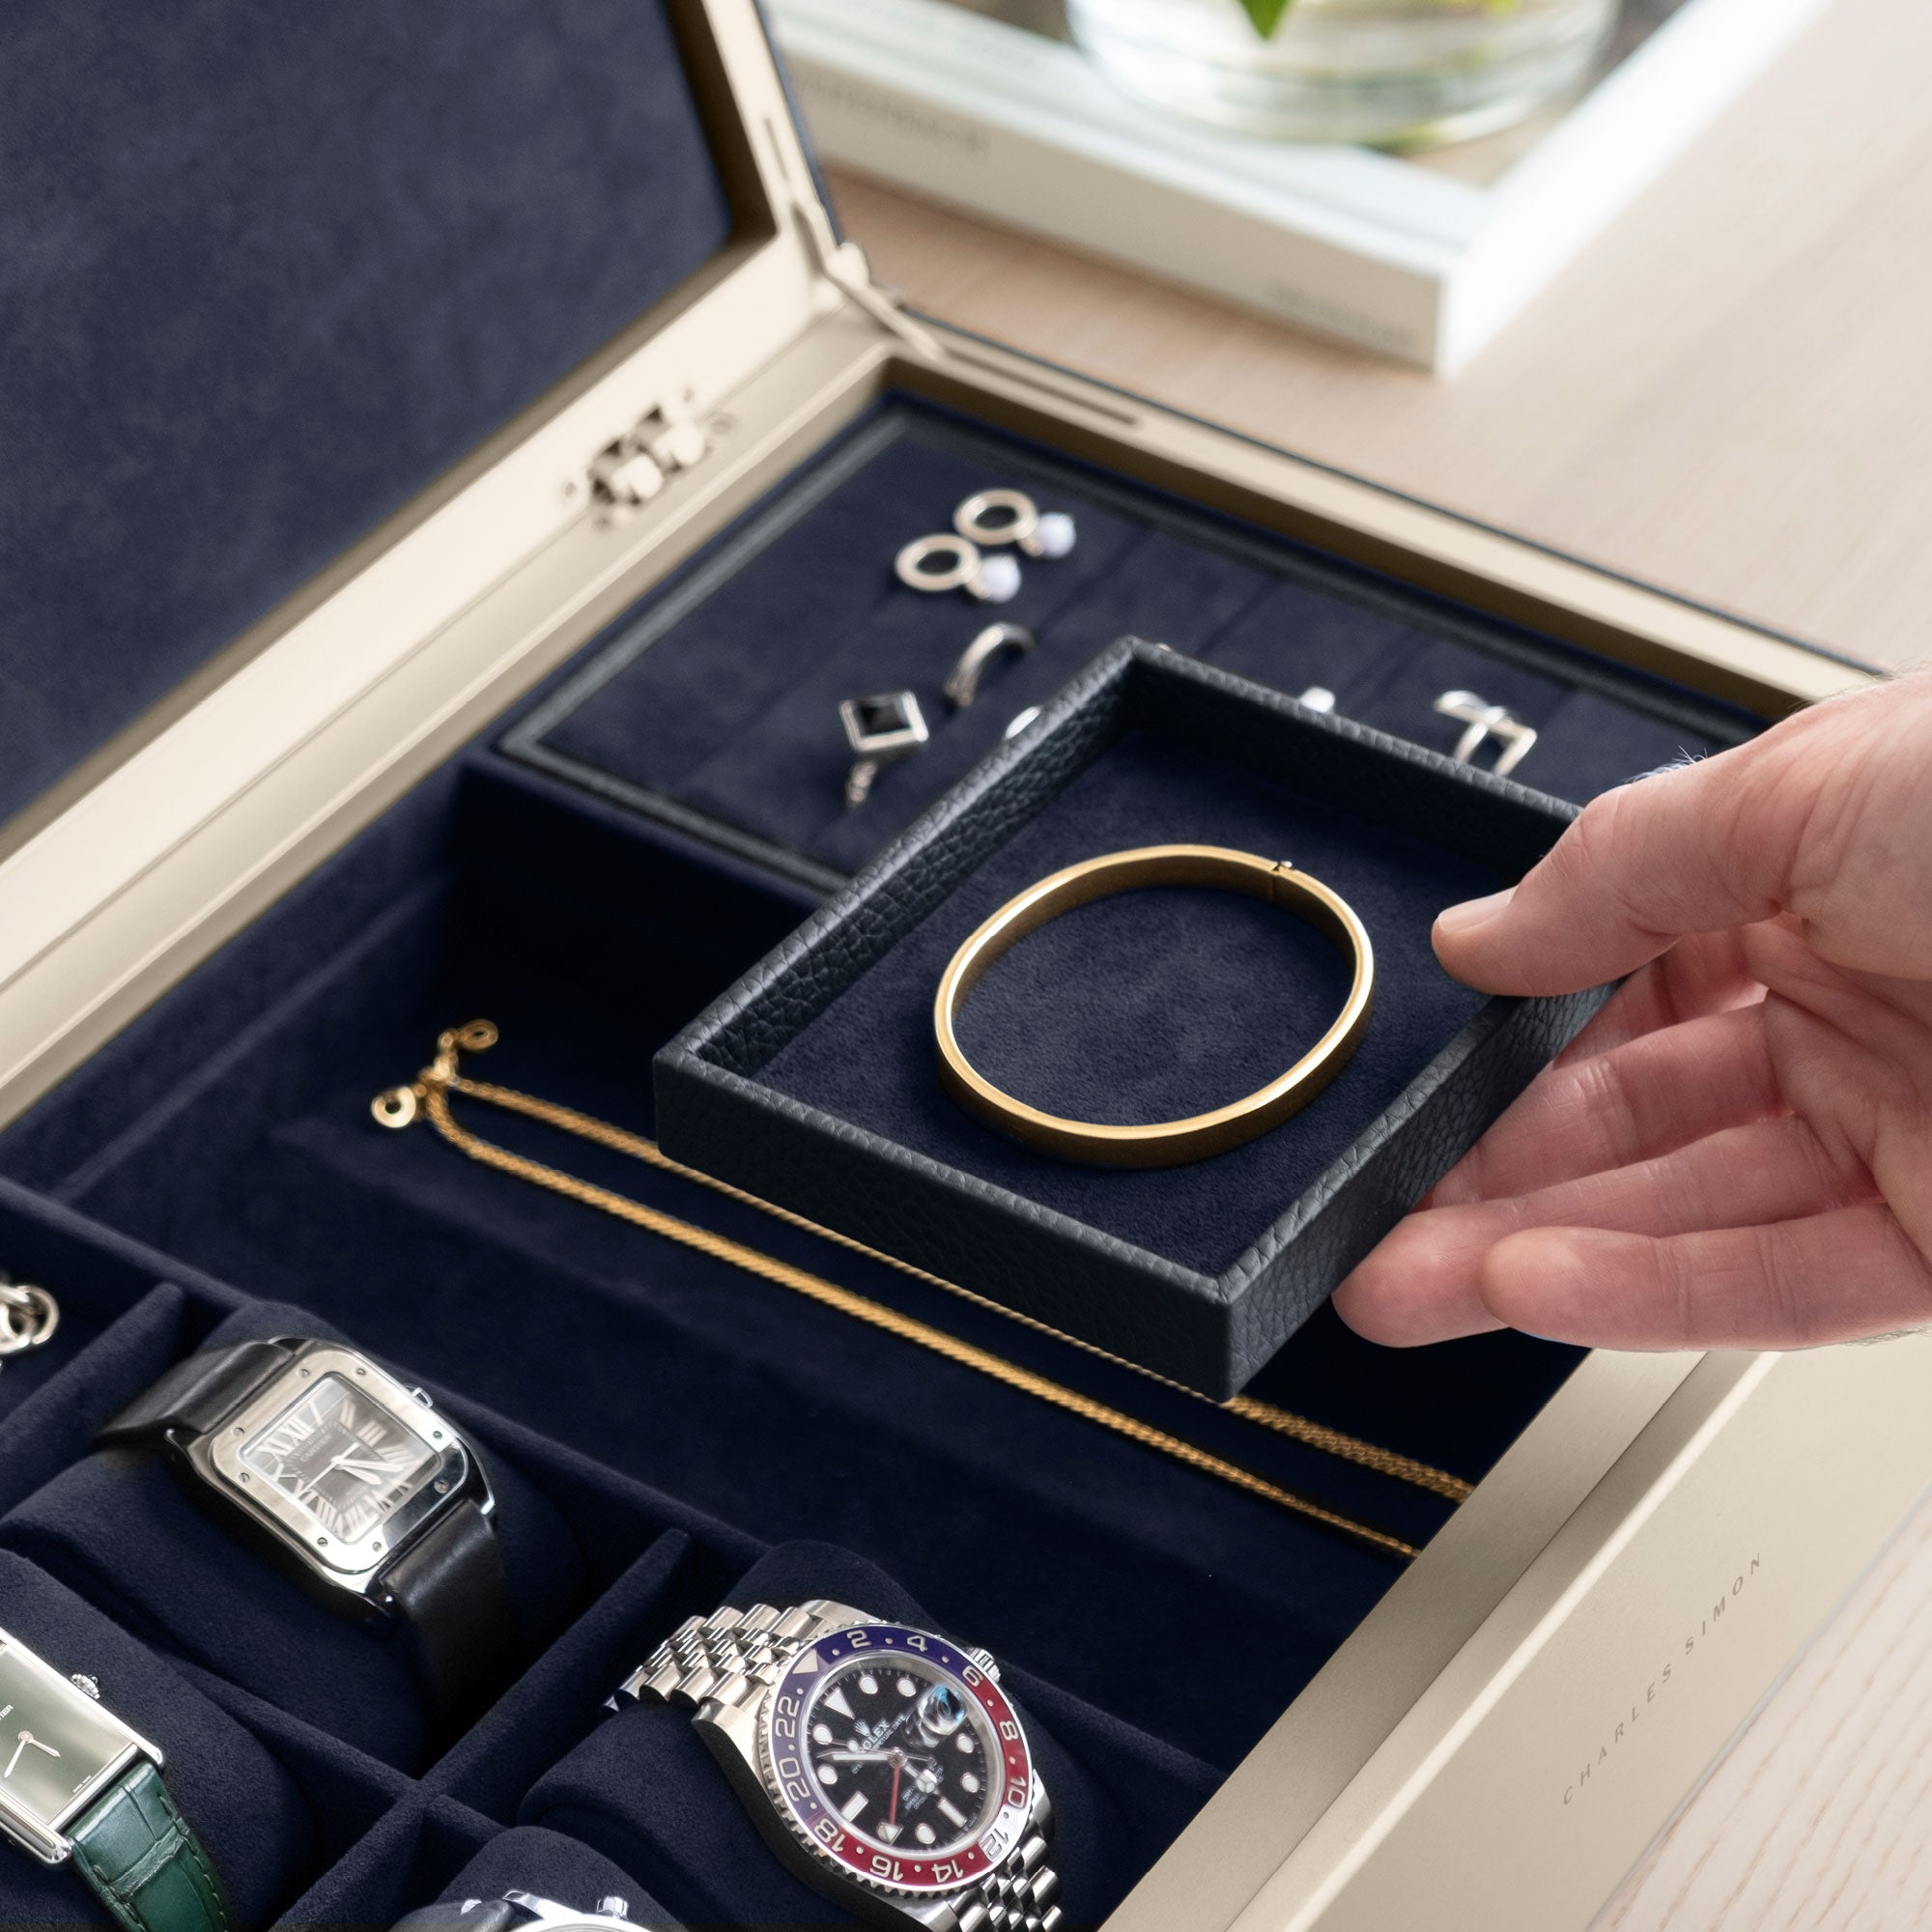 Detail photo of man taking gold necklace from the organization compartment of his gold Taylor 4 Watch and jewelry box in marine leather.